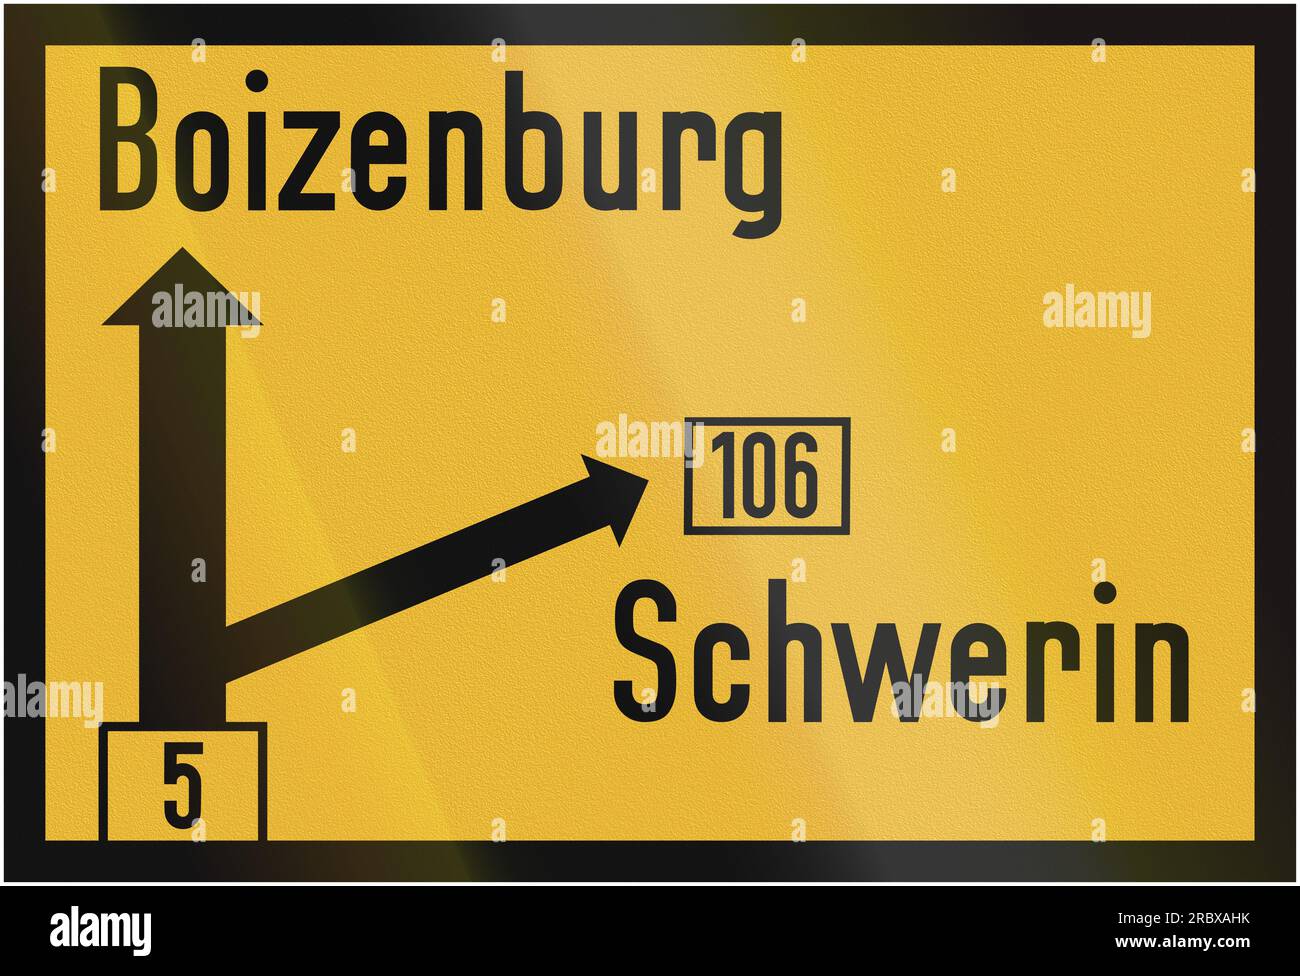 Old design (1956) of a German direction sign on a federal road showing the way to Boizenburg and Schwerin. Stock Photo